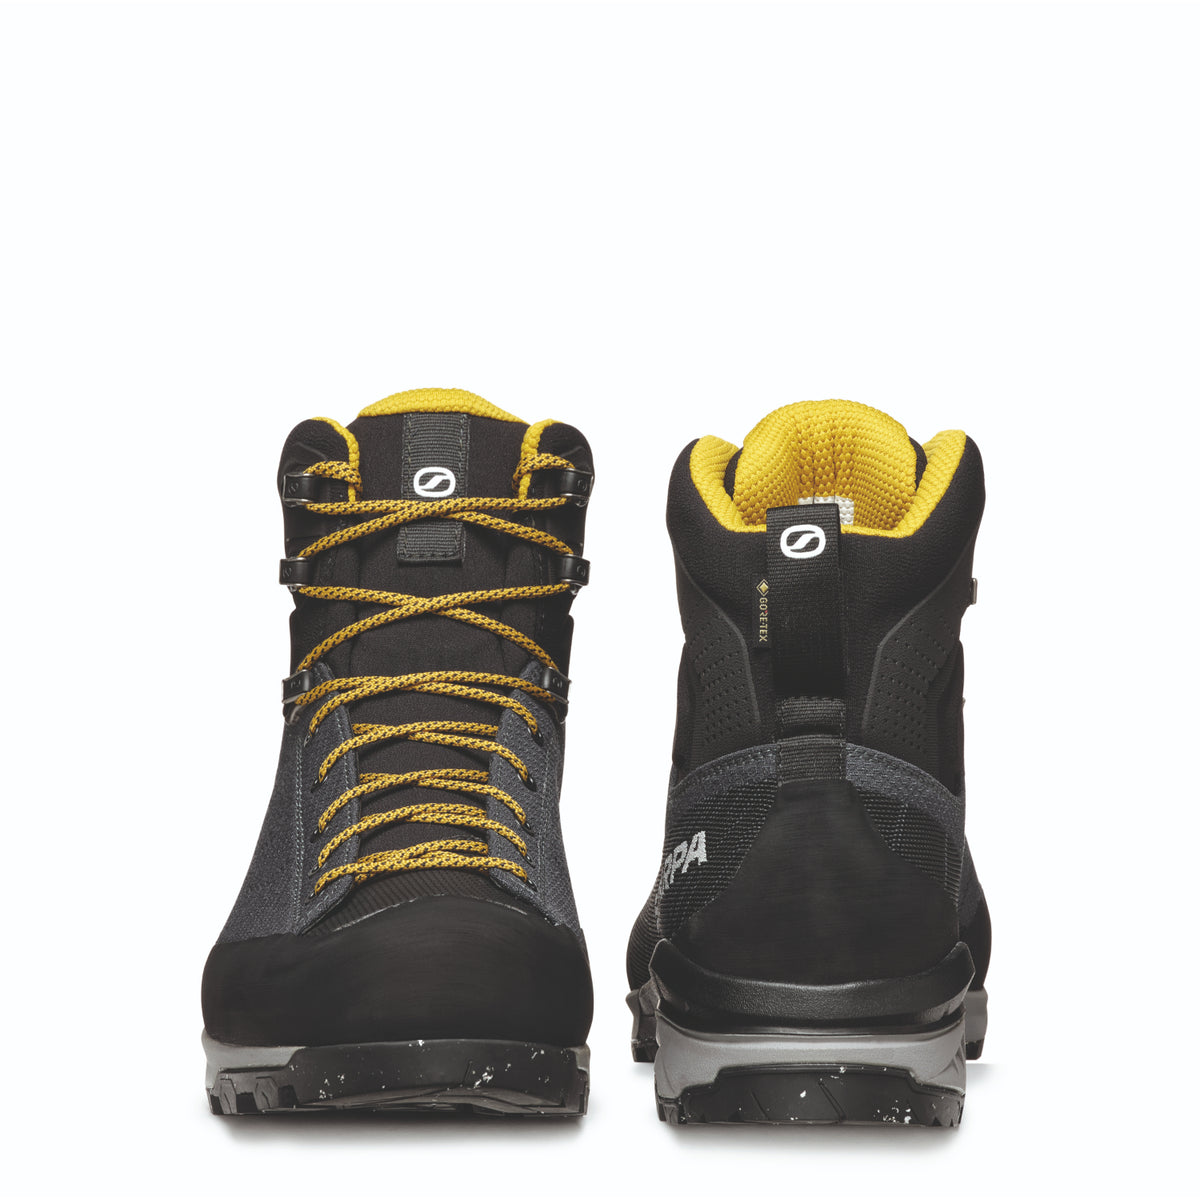 Scarpa Mescalito TRK Planet GTX in grey/curry. showing toe cap, laces and heel